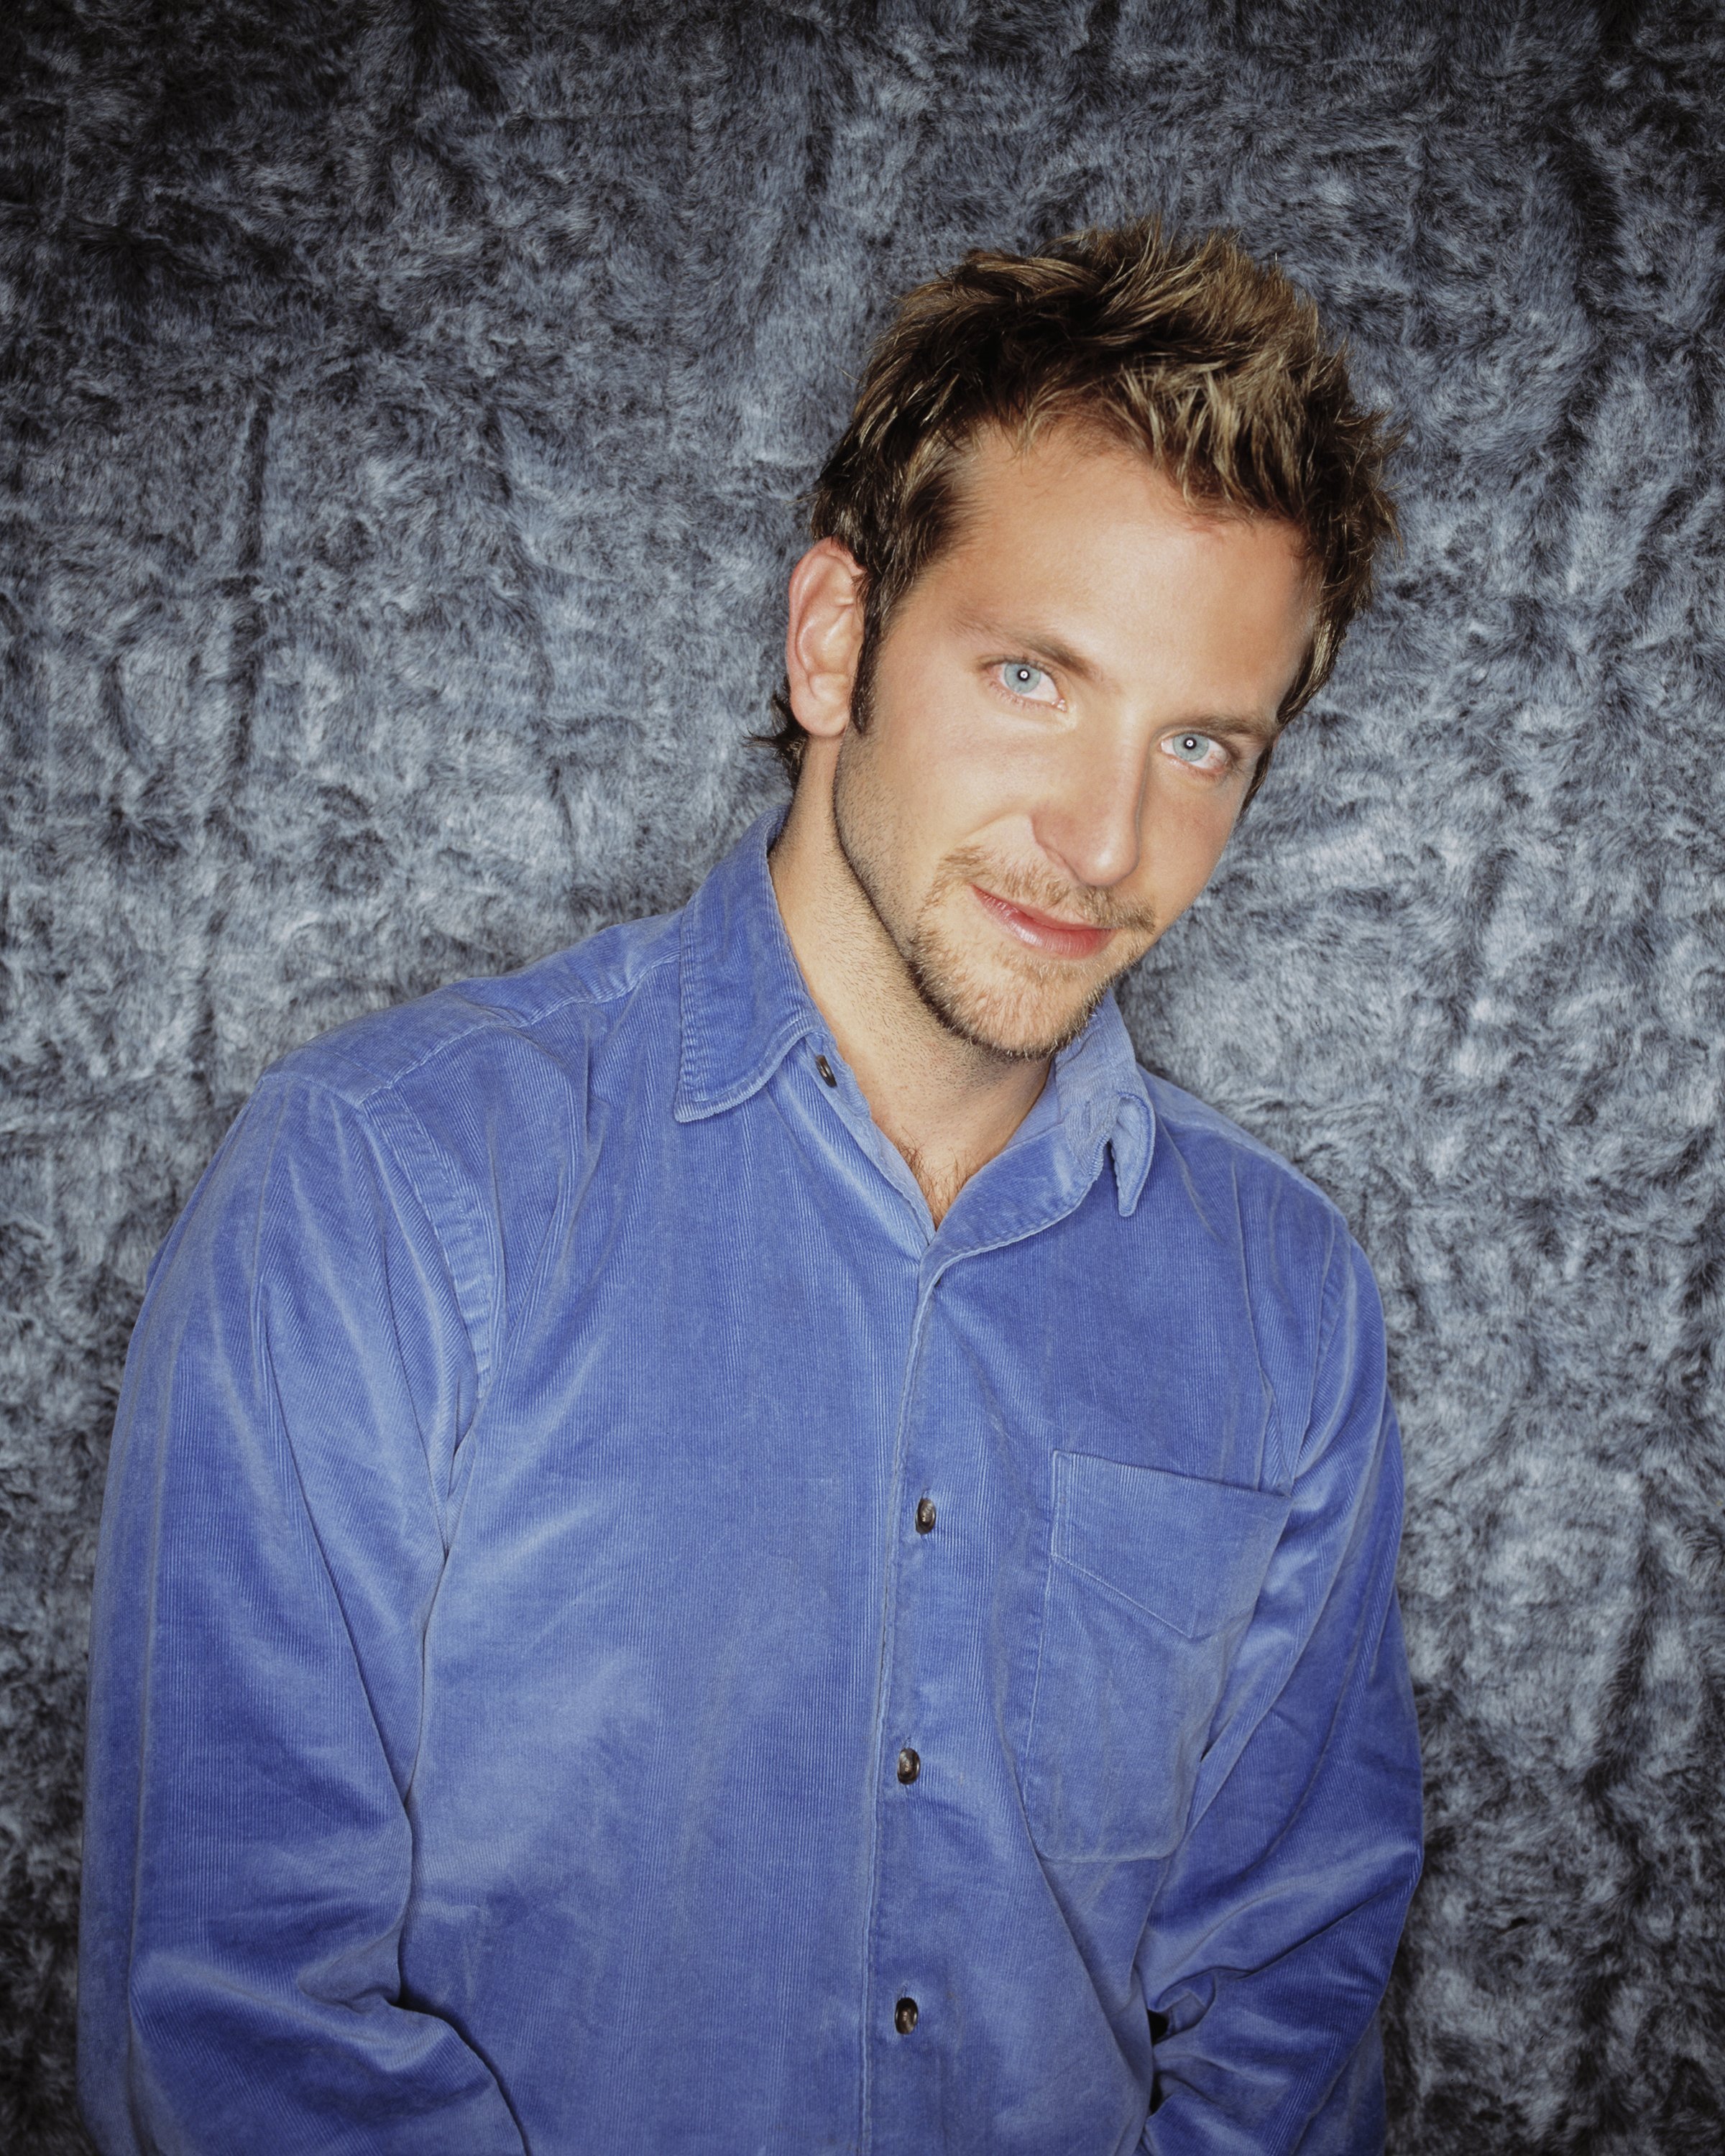 Bradley Cooper promotional photo for 'Alias' in 2002. | Source: Getty Images